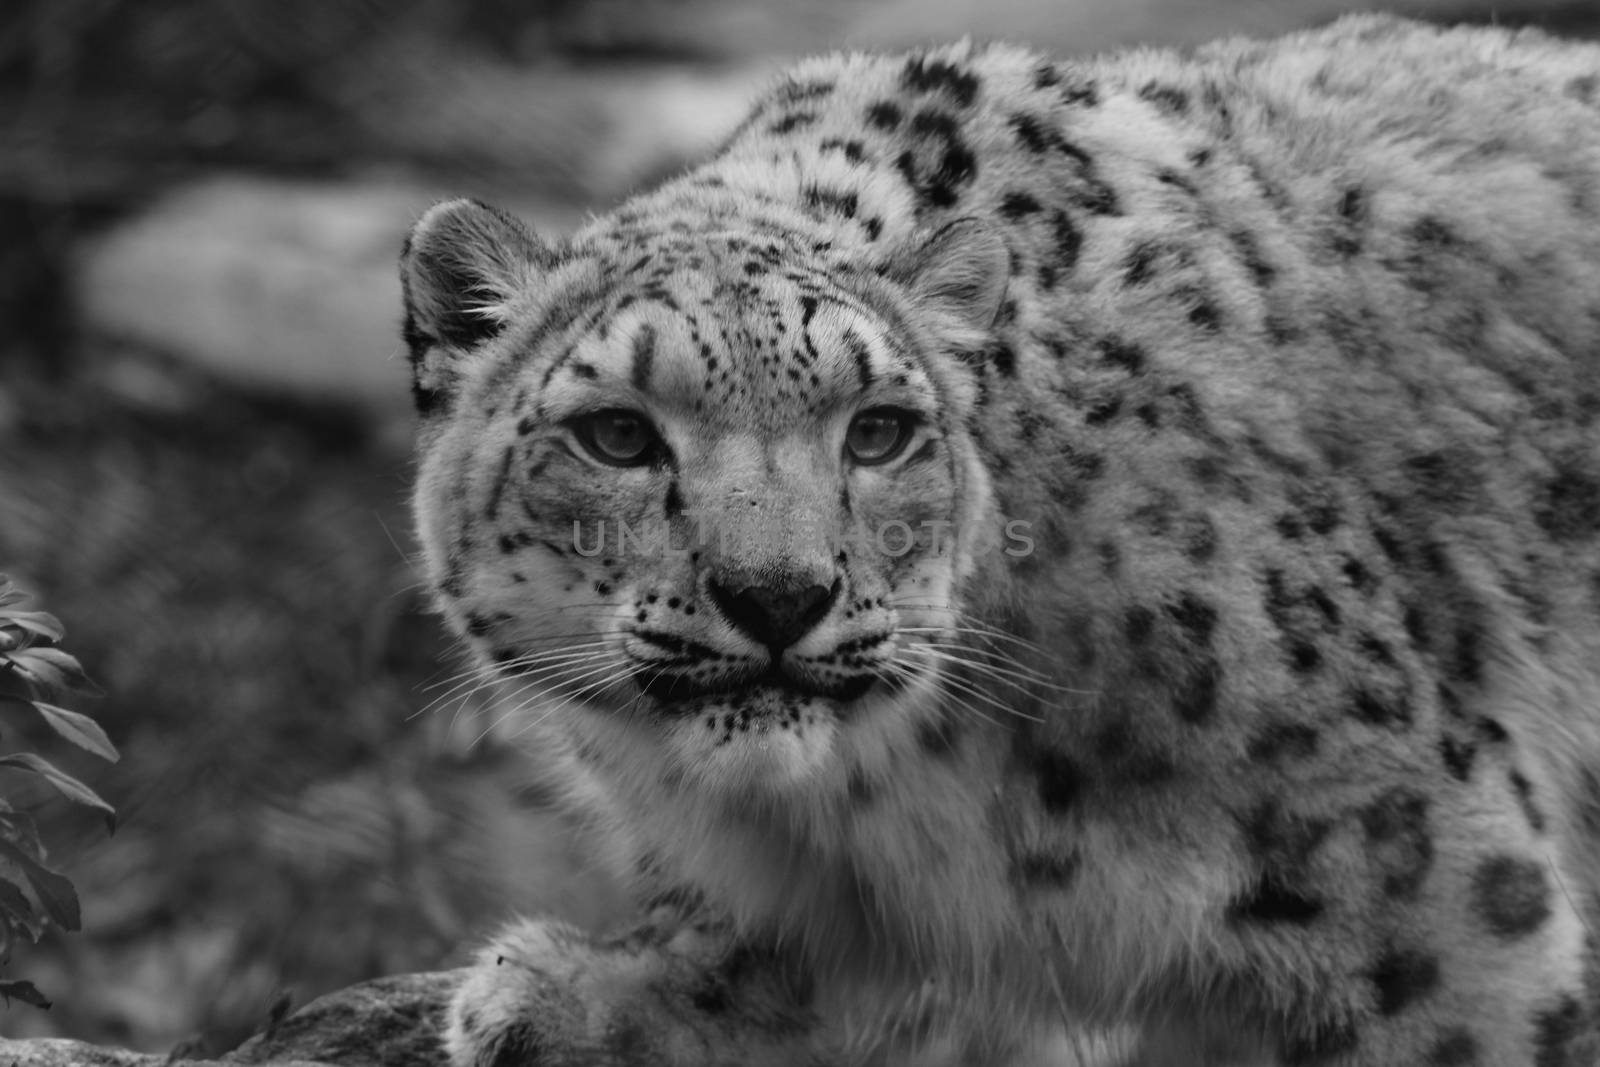 Black and white Profile Portrait of a Snow Leopard in a Snow Storm Against a Mot by mynewturtle1